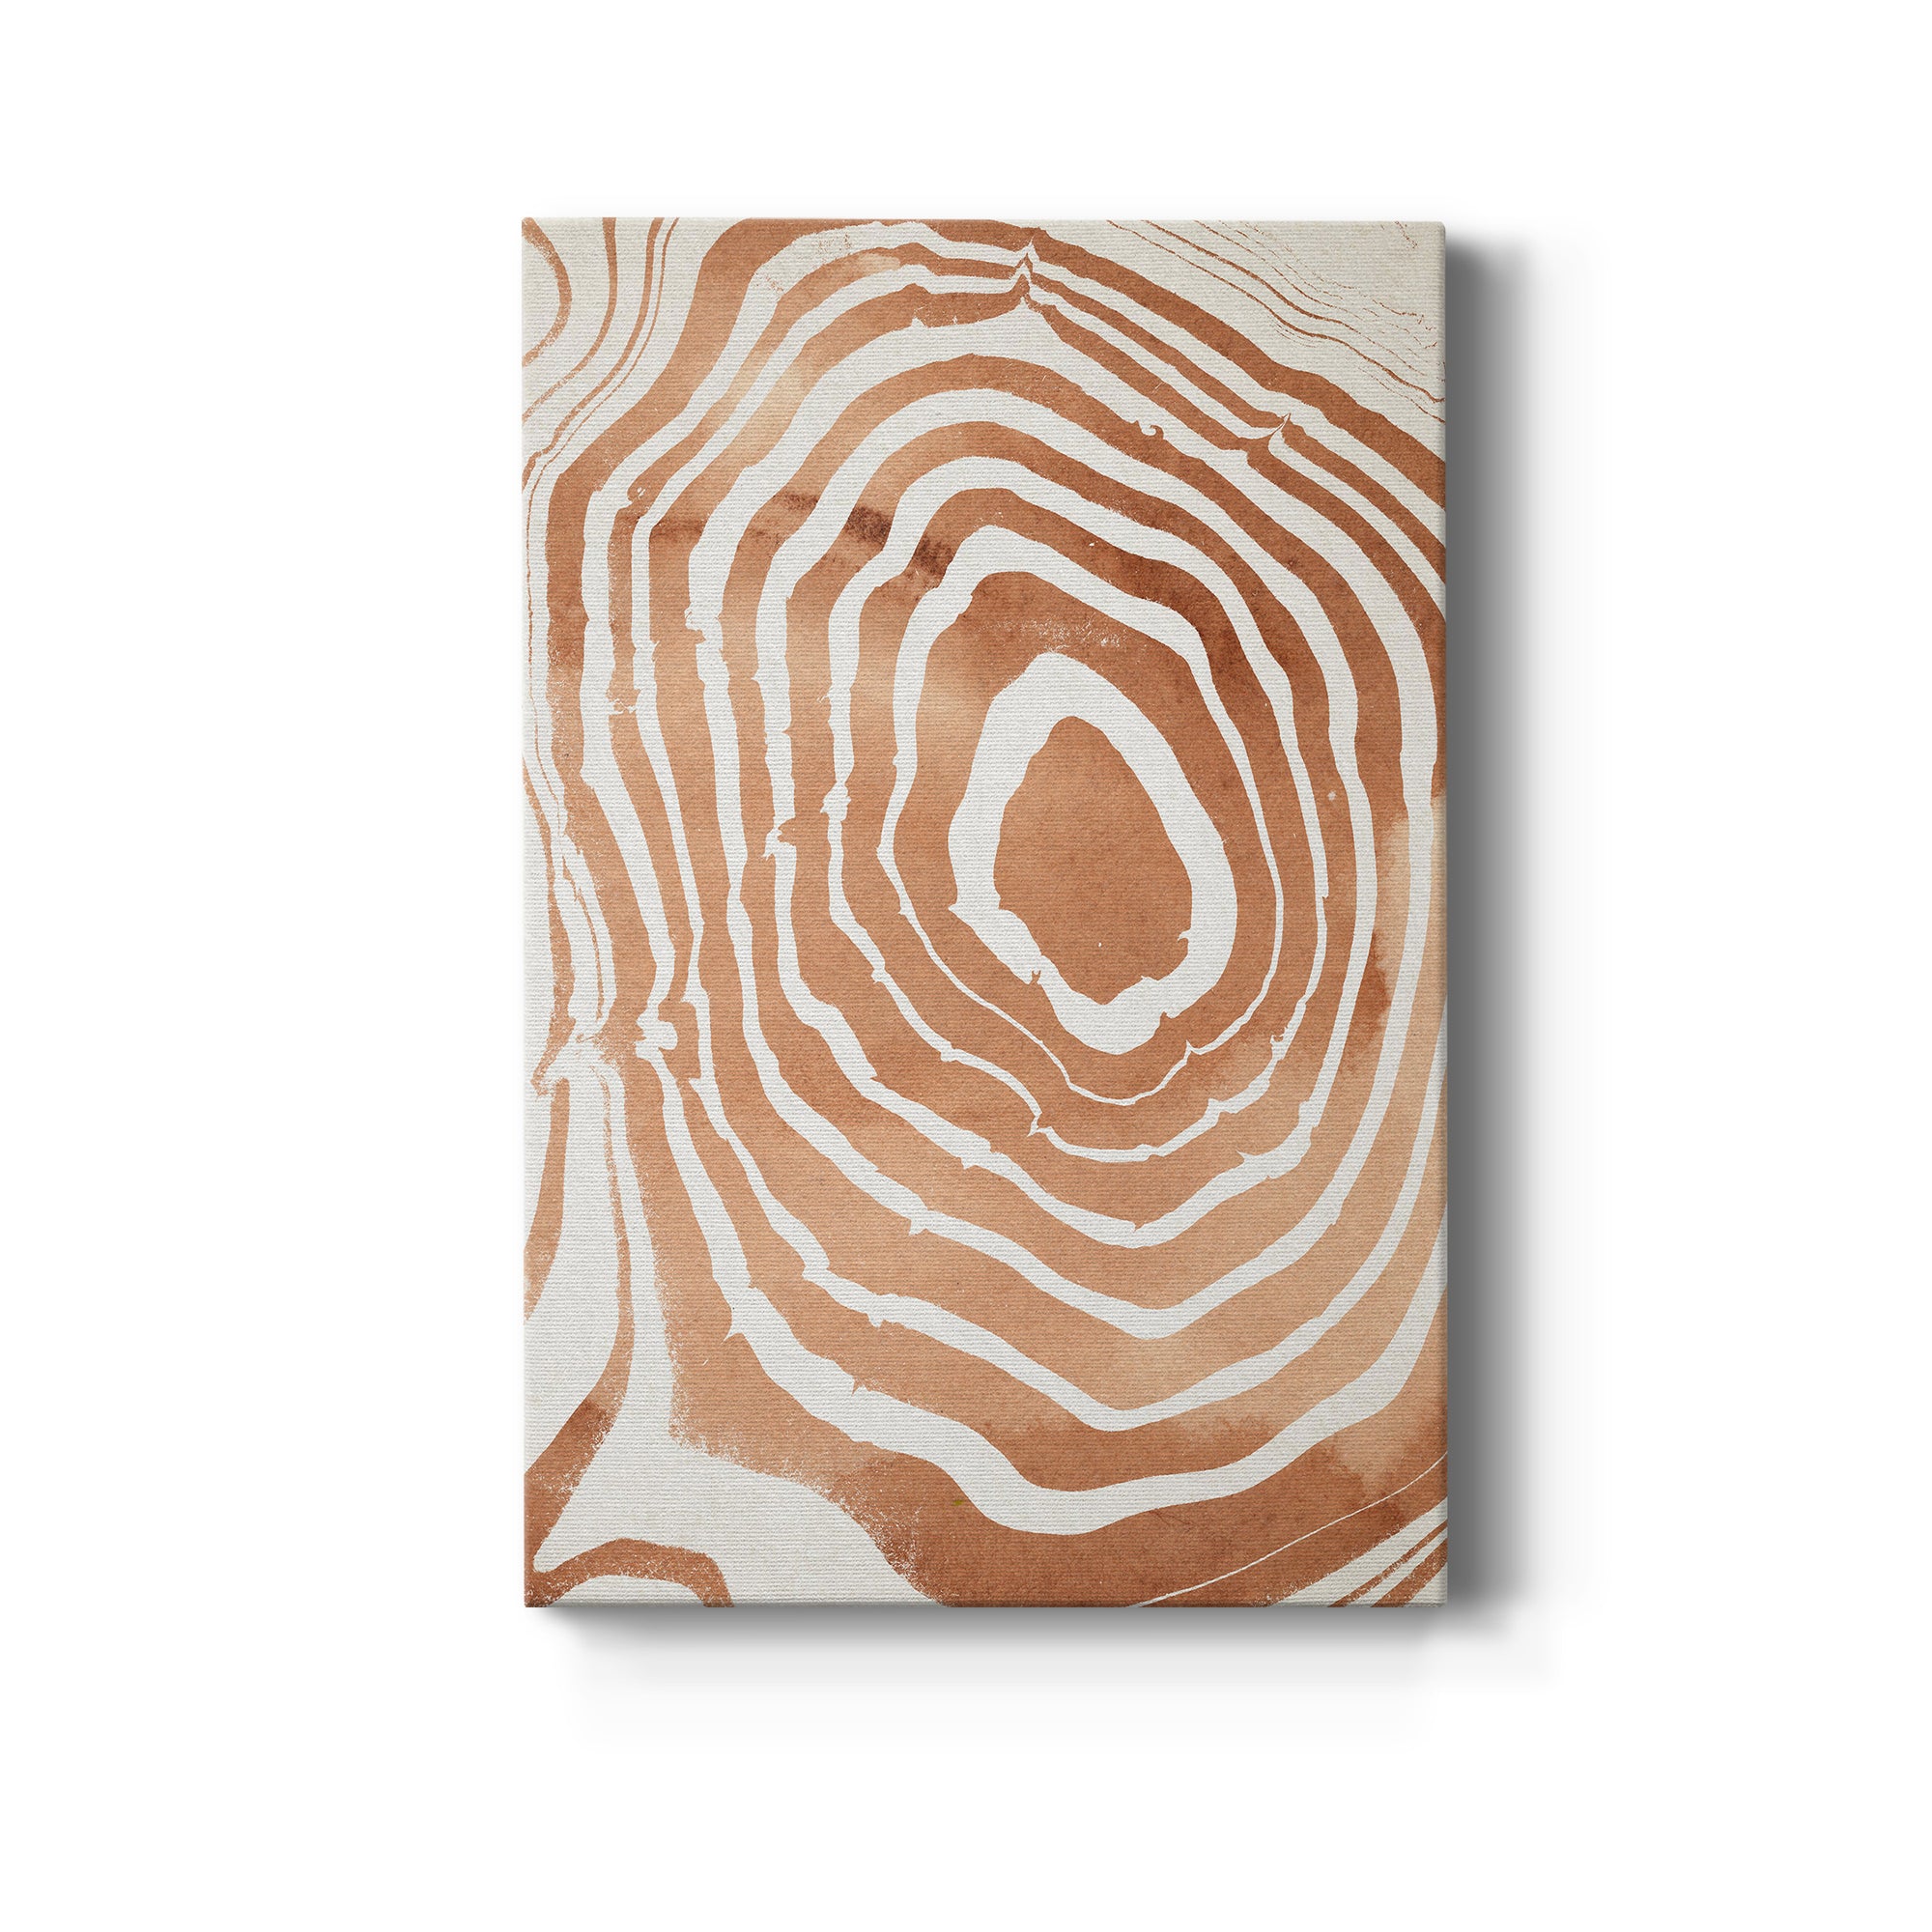 Wood Grain Suminagashi III Premium Gallery Wrapped Canvas - Ready to Hang